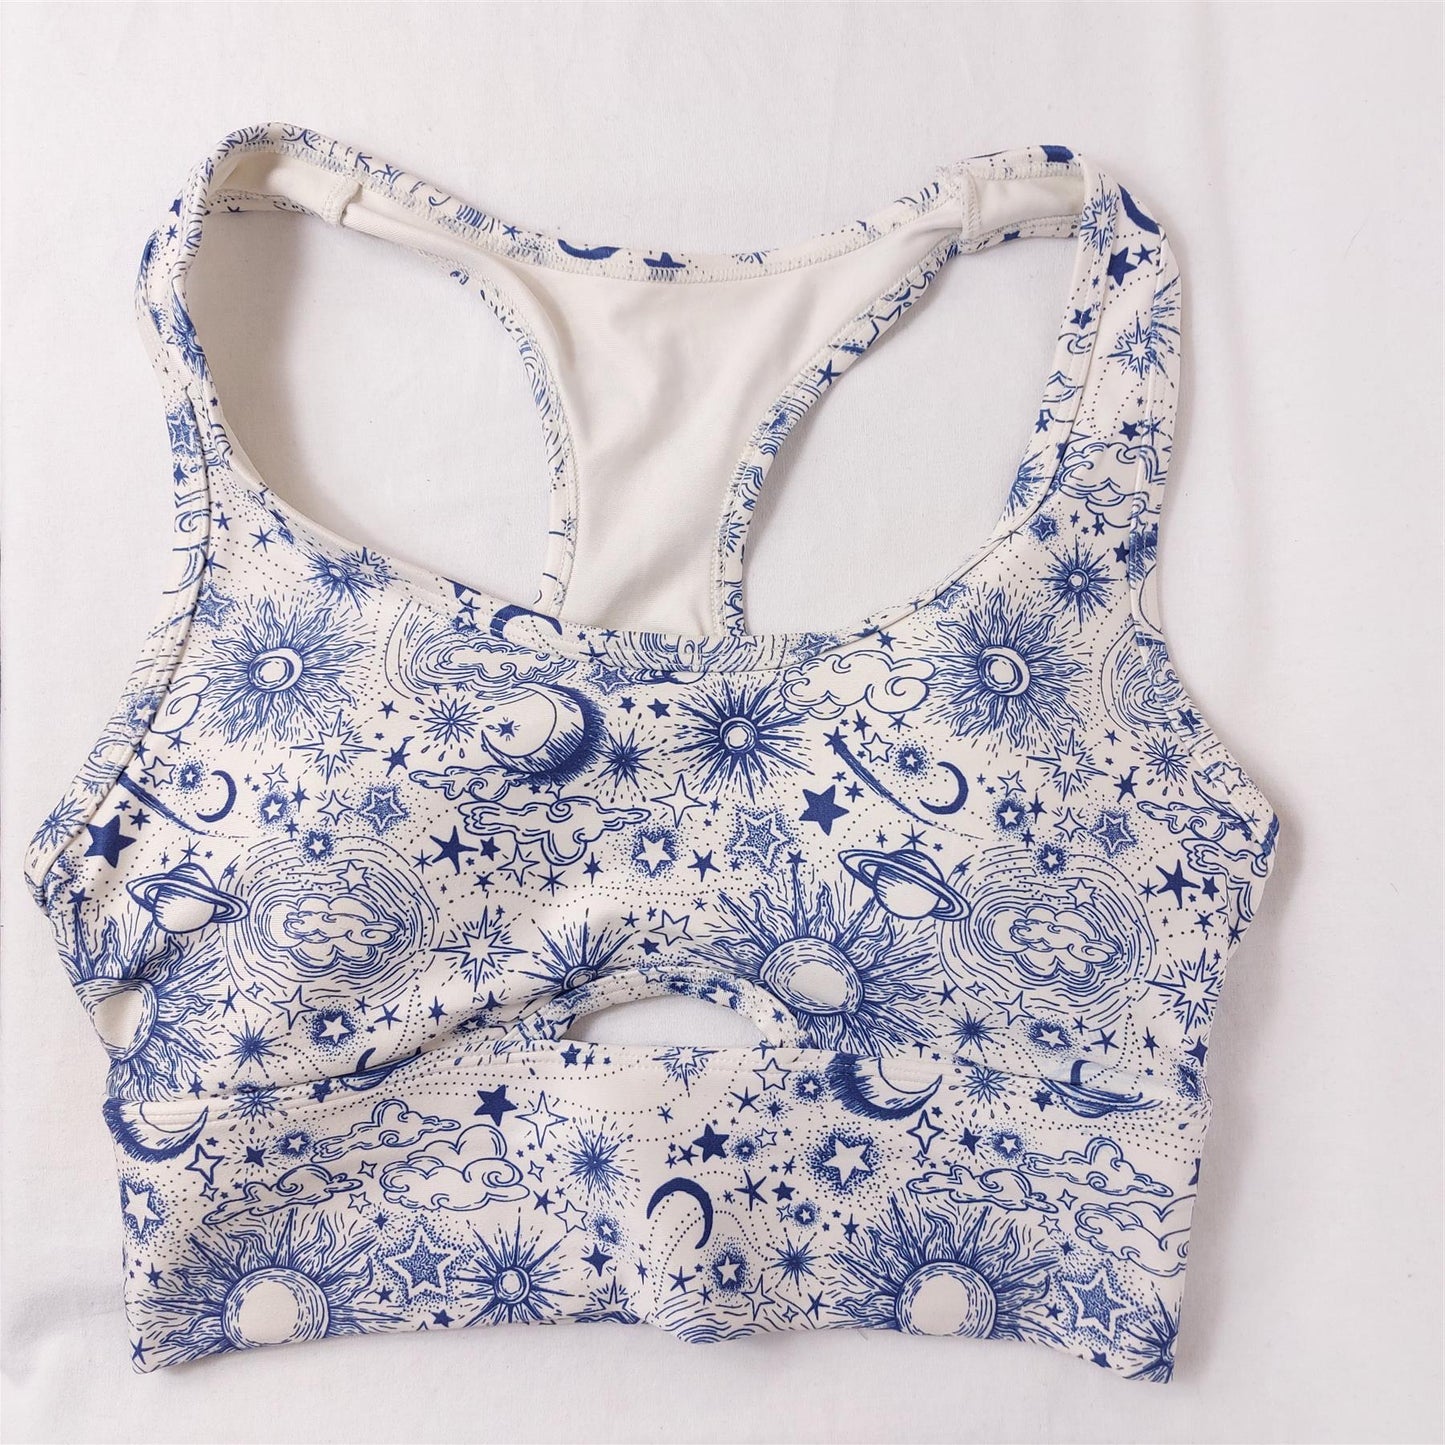 Wildfox Sports Gym Bra Yoga Top Non-Wired Removable Padding Blue & White Stars